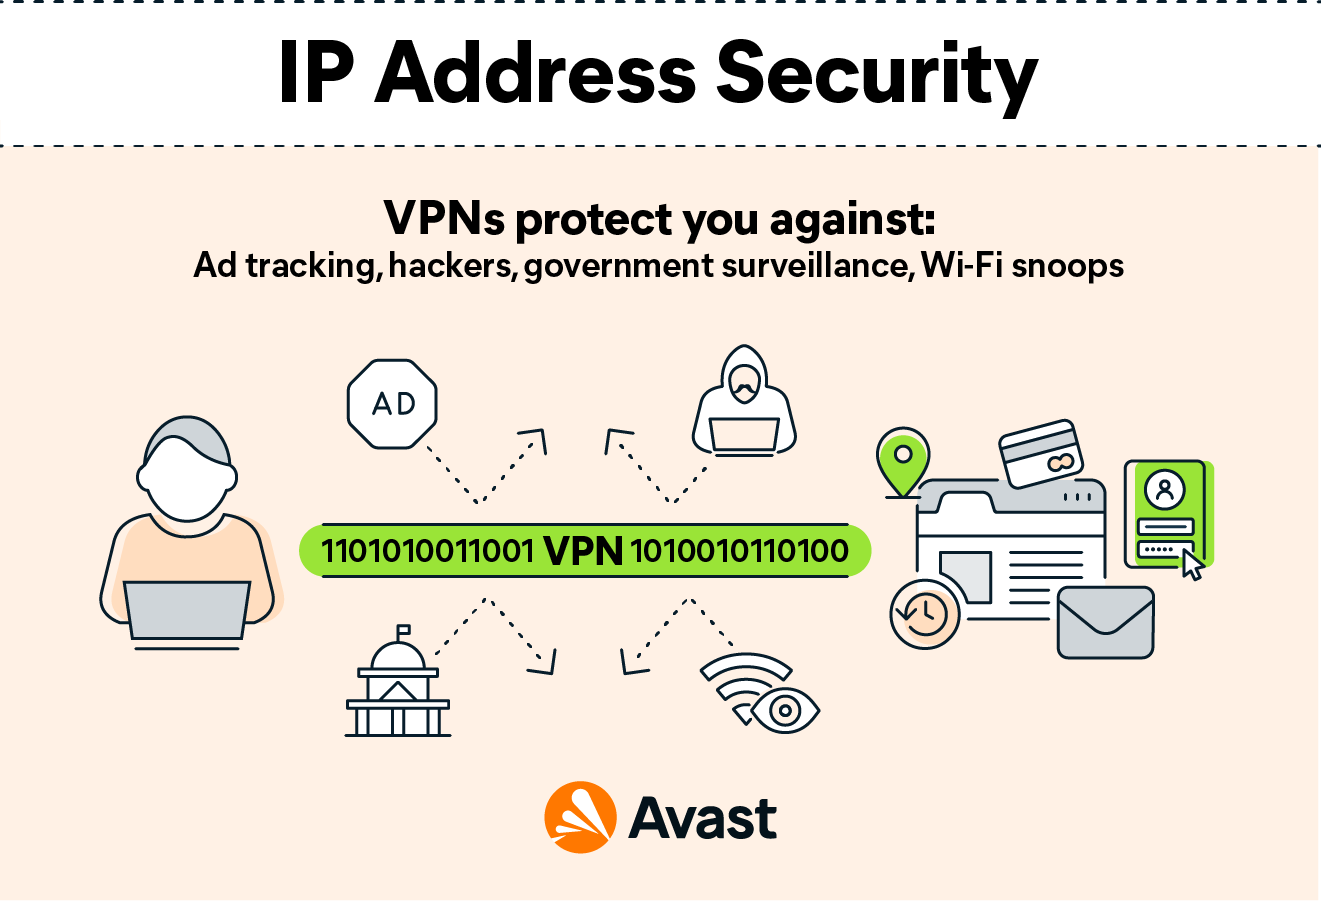 How VPNs hide your IP address by encrypting all internet traffic and routing data via a secure tunnel.